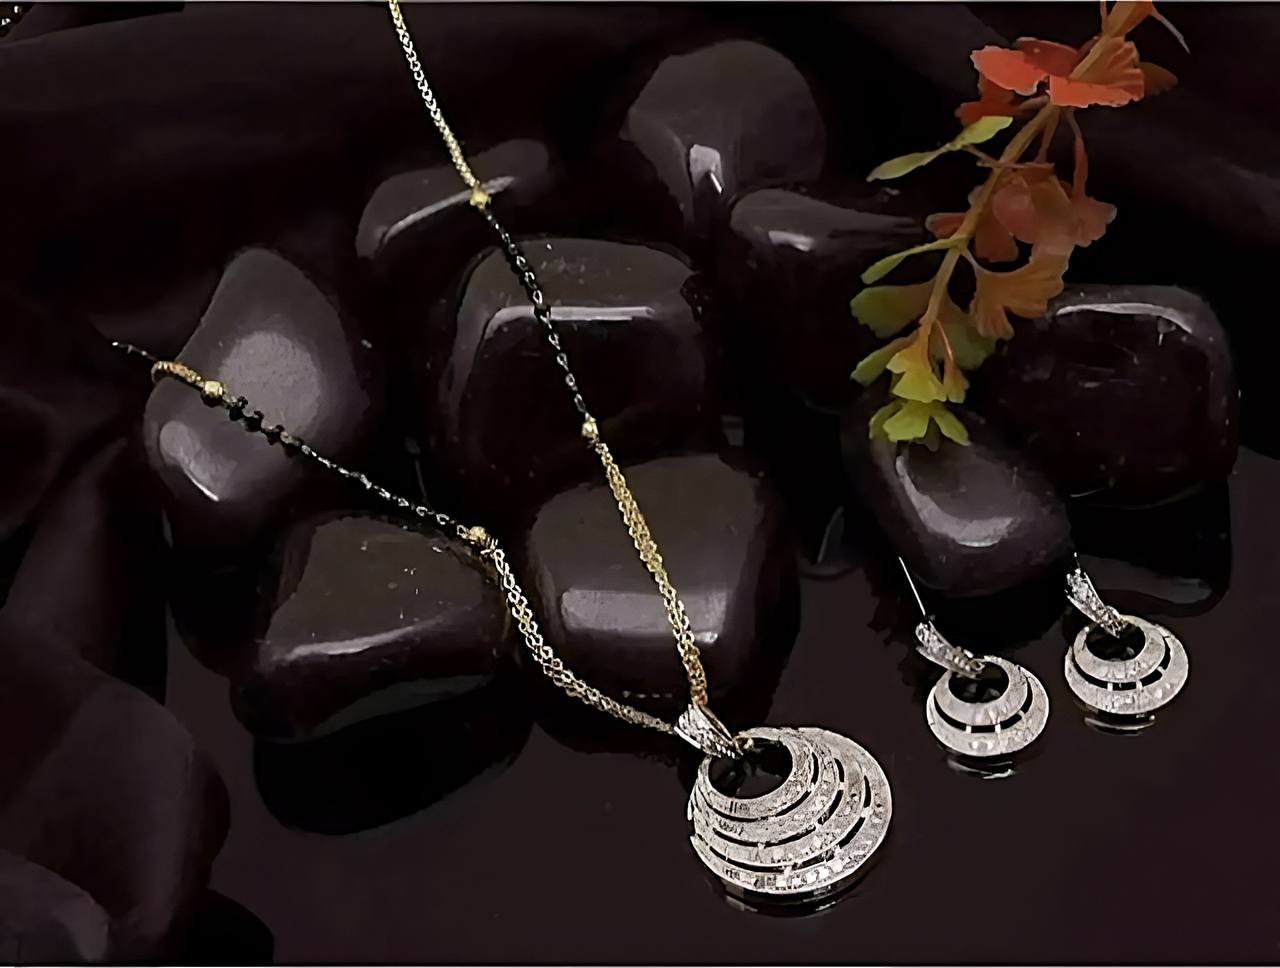 Stunning Imitation Mangalsutra Set with Pendant and Earrings in Durable Alloy Material